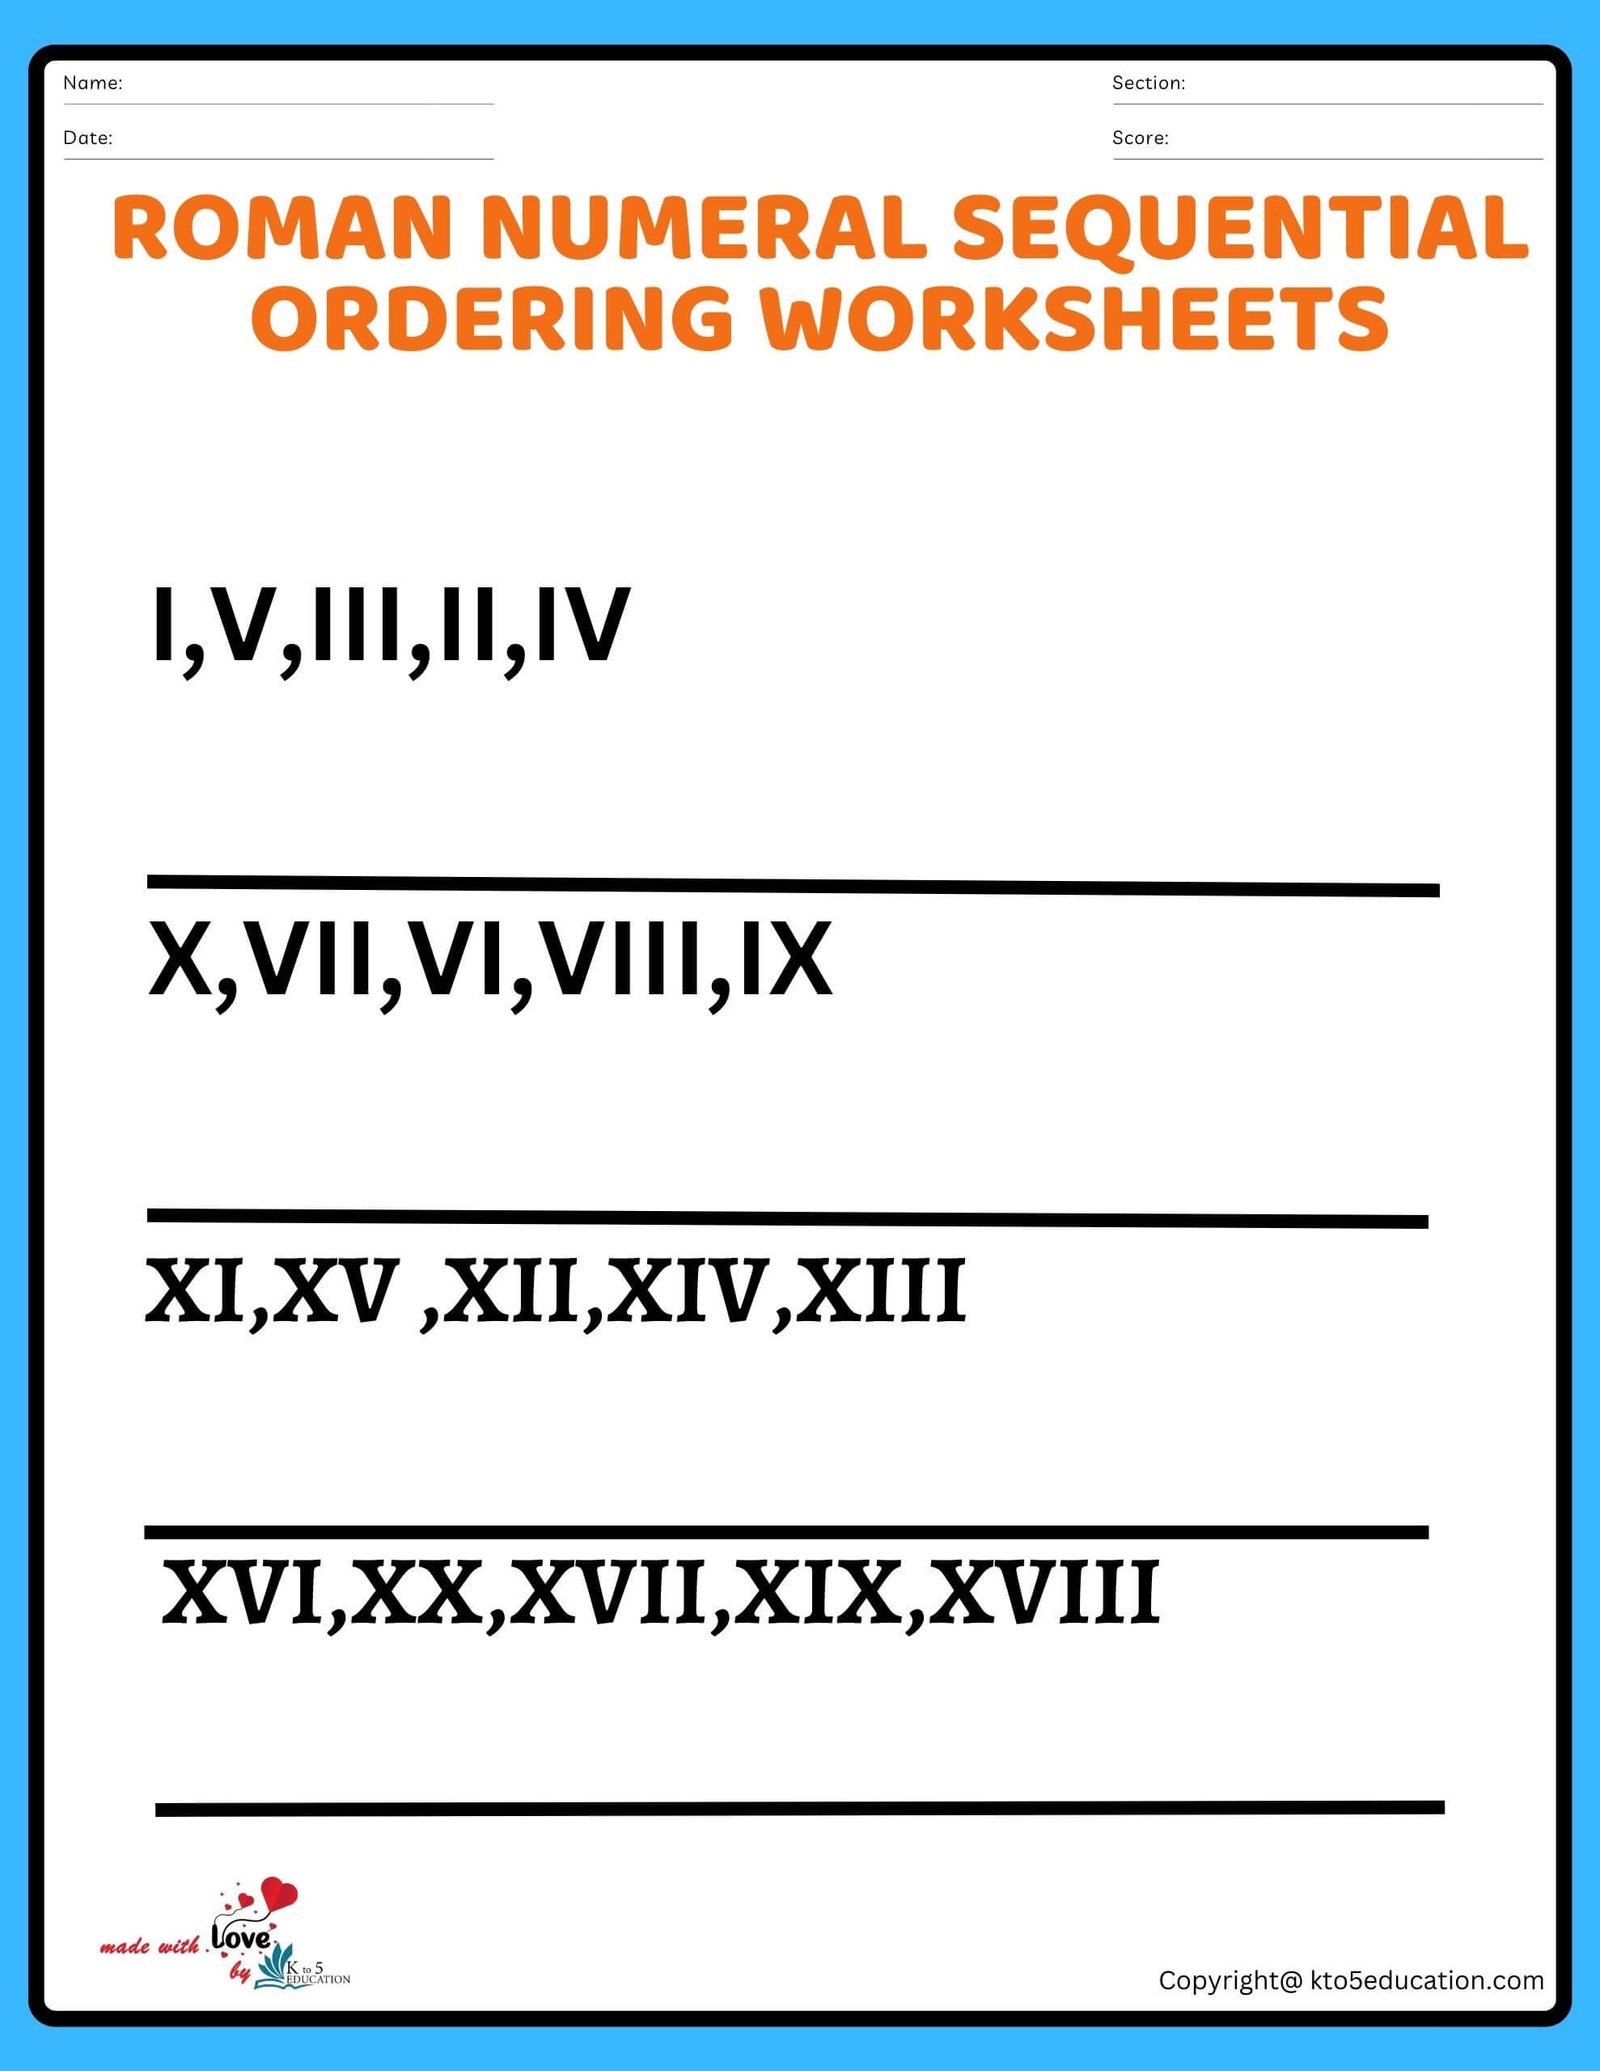 Roman Numeral Sequential Ordering Worksheets Roman Numeral Clock Worksheet